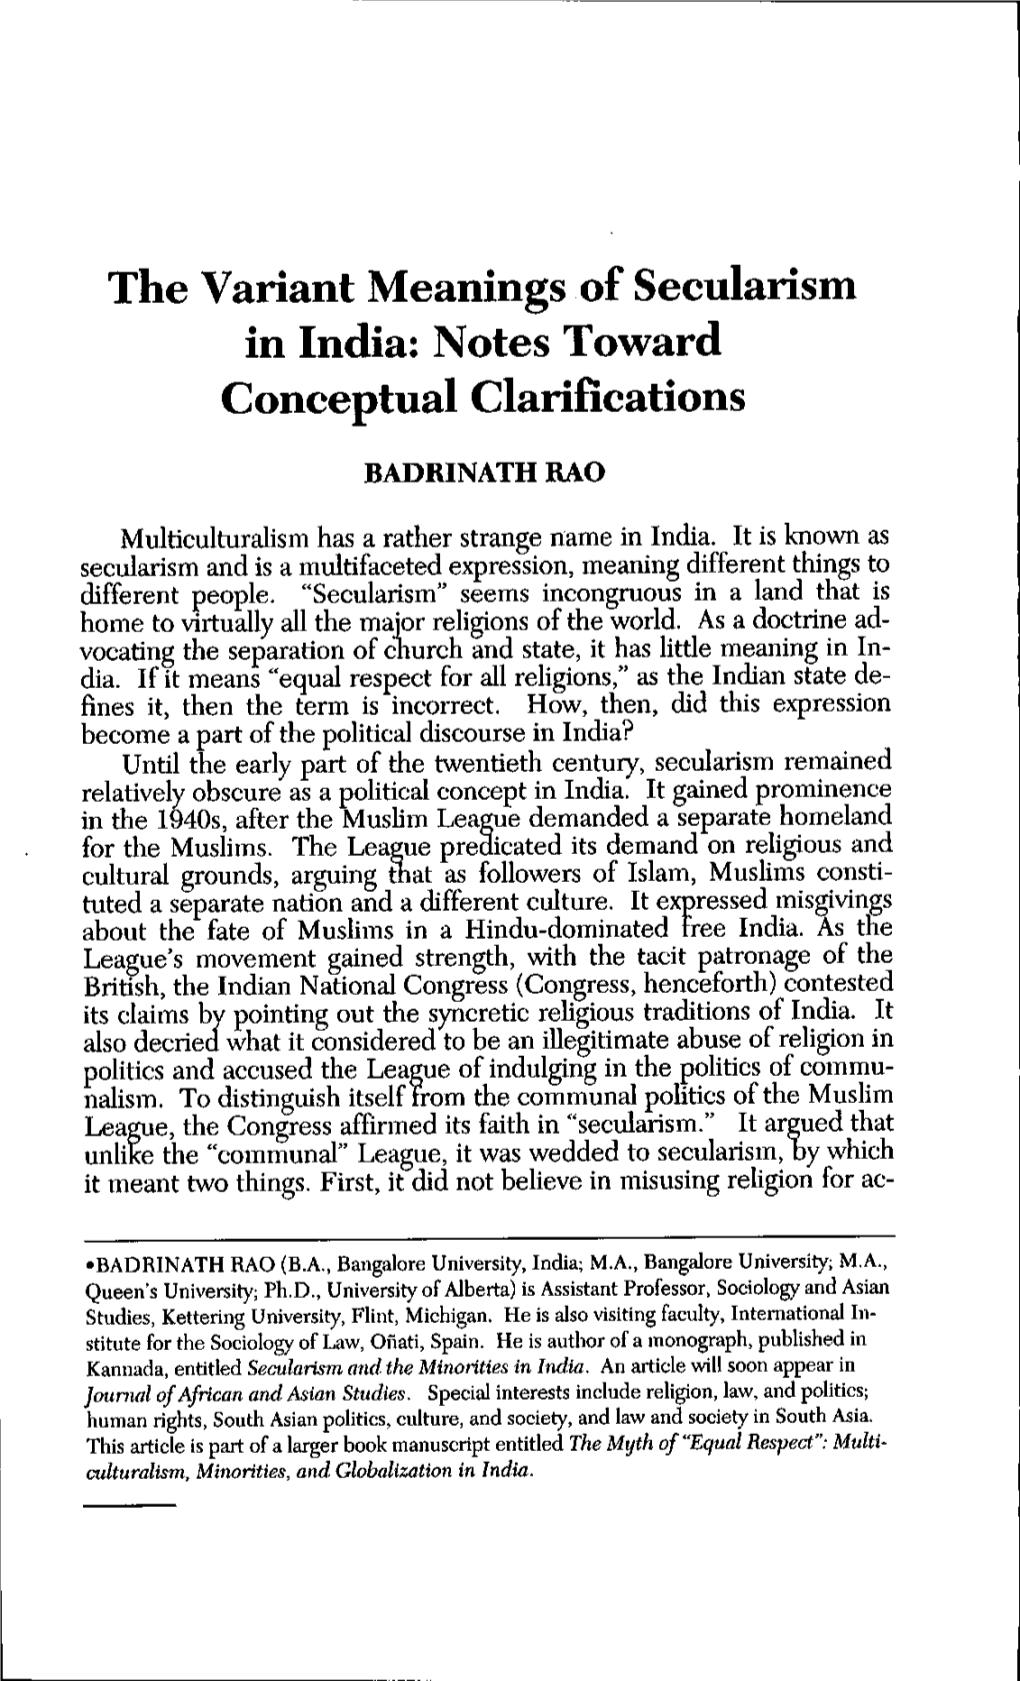 The Variant Meanings of Secularism in India: Notes Toward Conceptual Clarifications